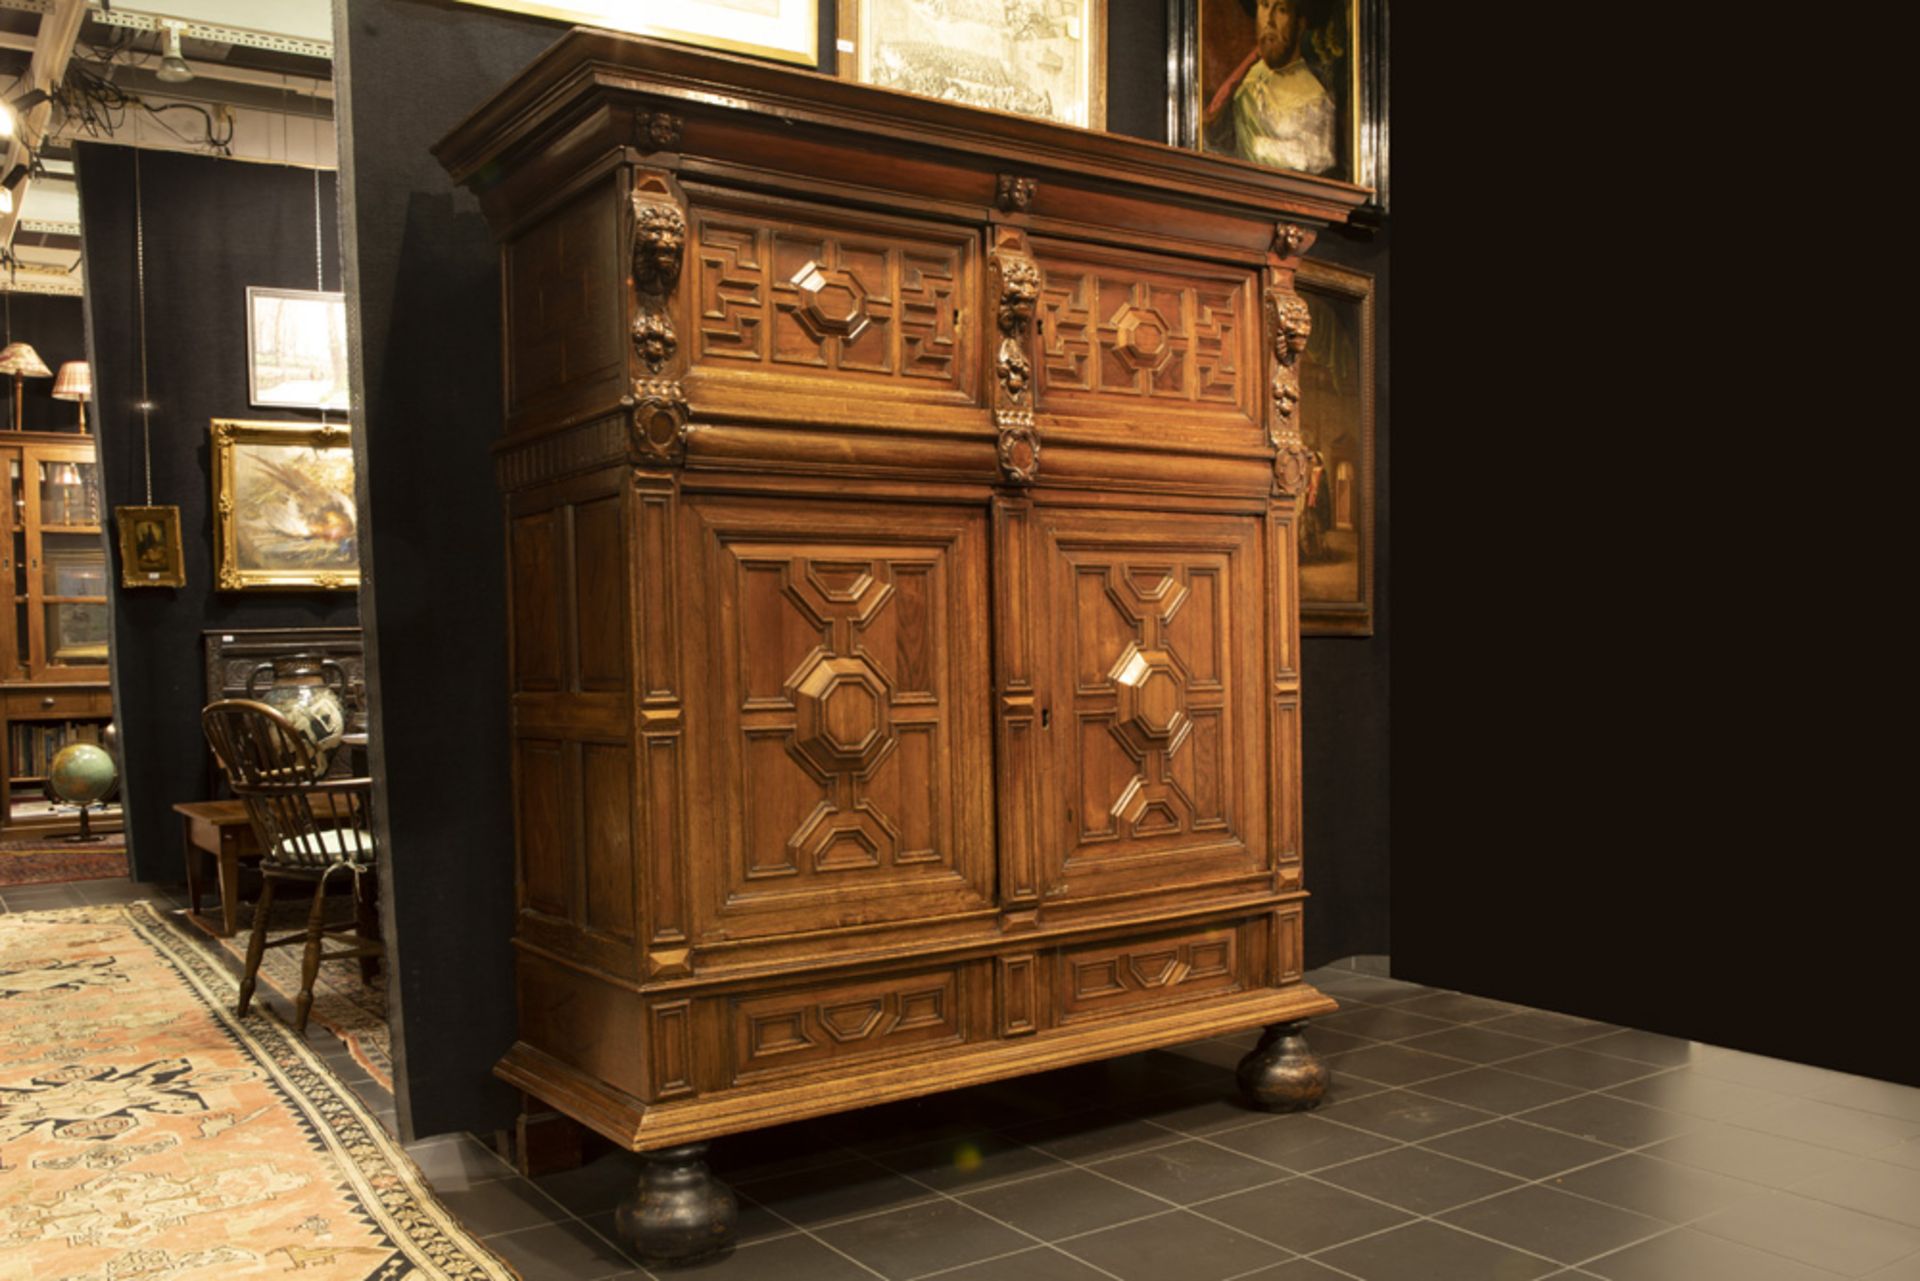 17th/18th Cent. Renaissance style cupbaoard in oak and walnut with typical sculpted ornamentation ||